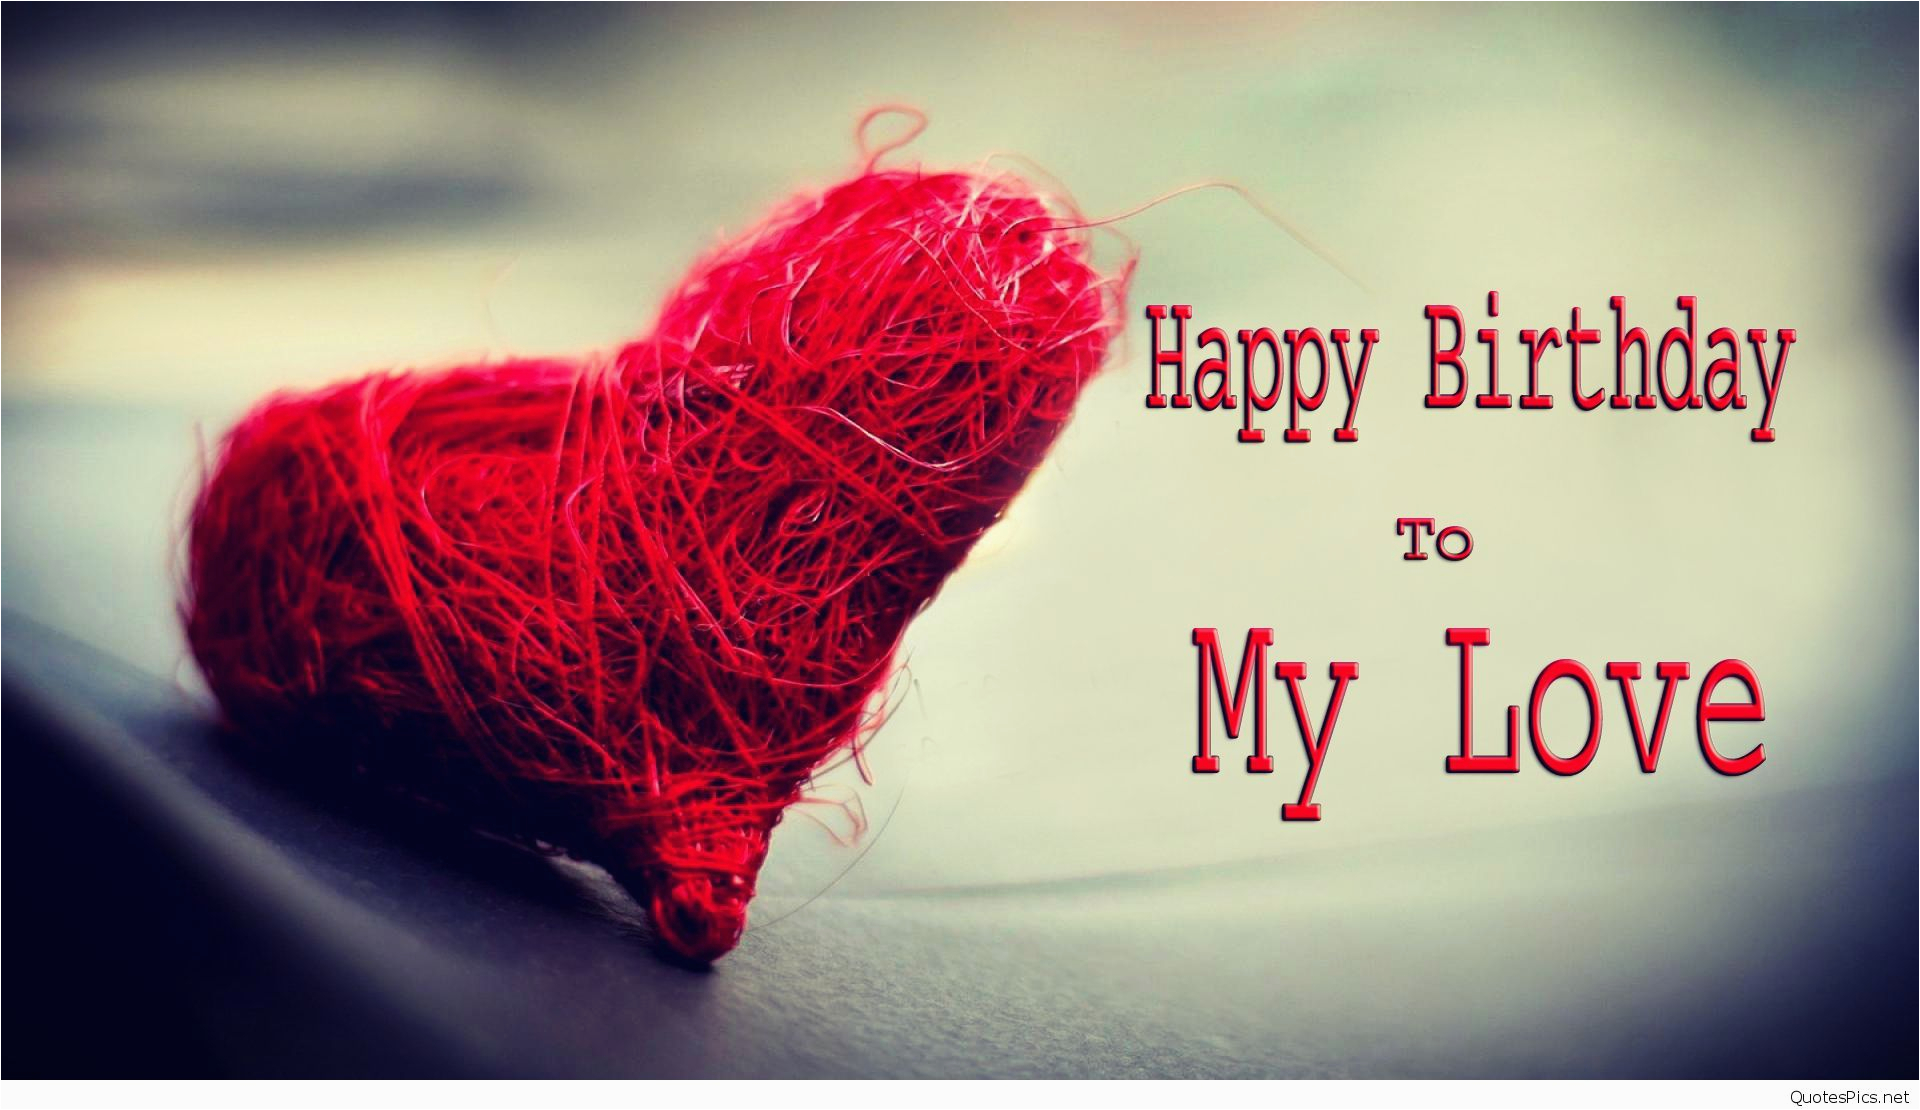 Happy Birthday Quote for Love Love Happy Birthday Wishes Cards Sayings